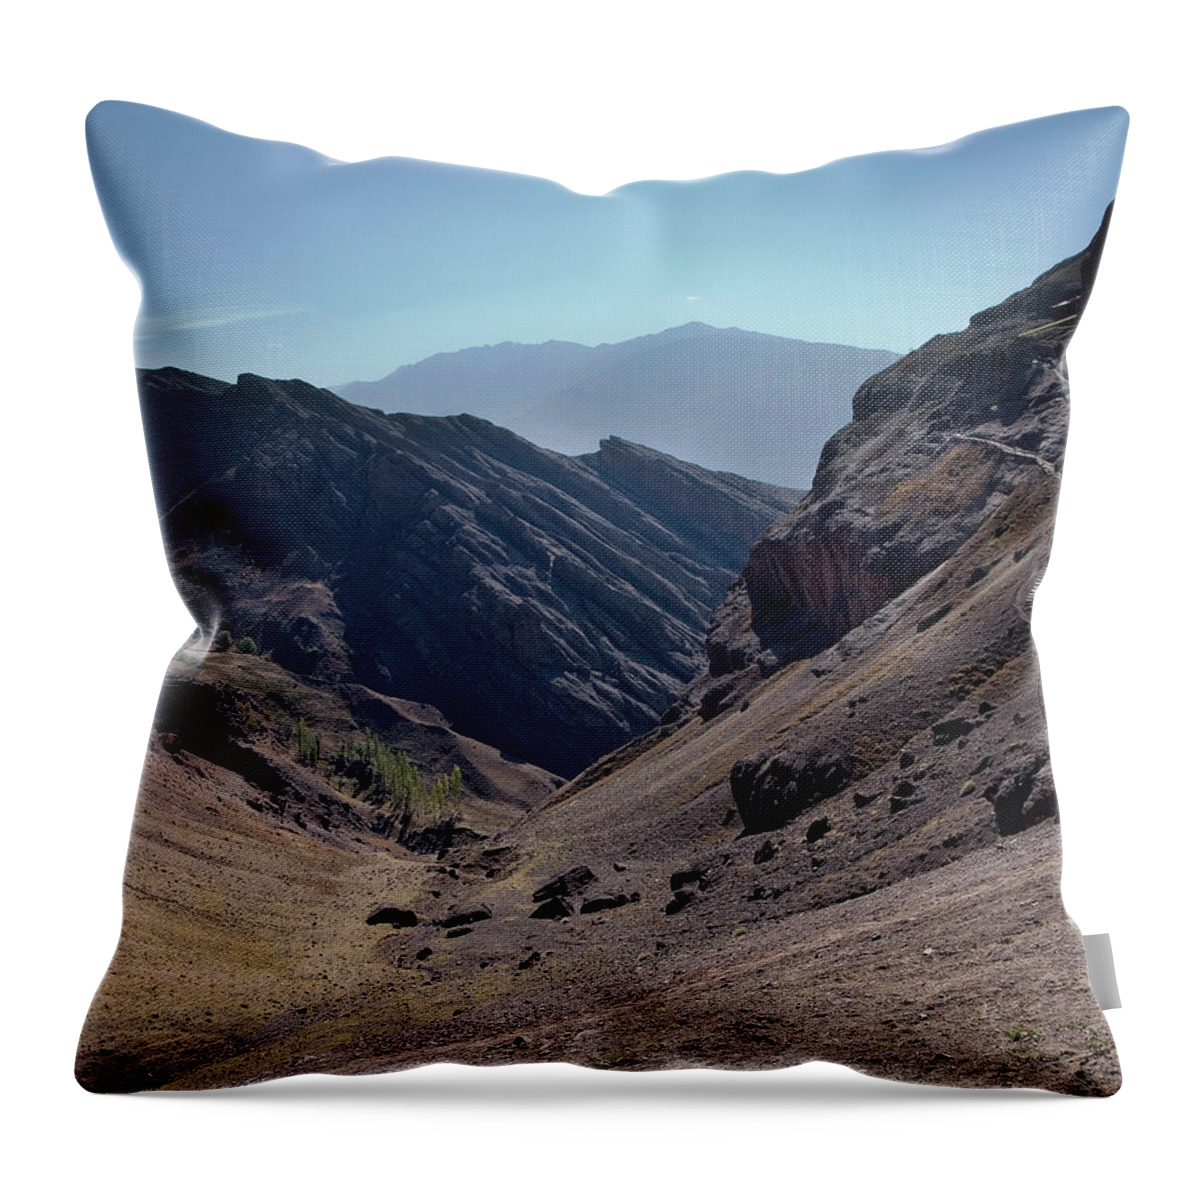 Scenics Throw Pillow featuring the photograph Alamut Valley, Iran by Alexander Newman